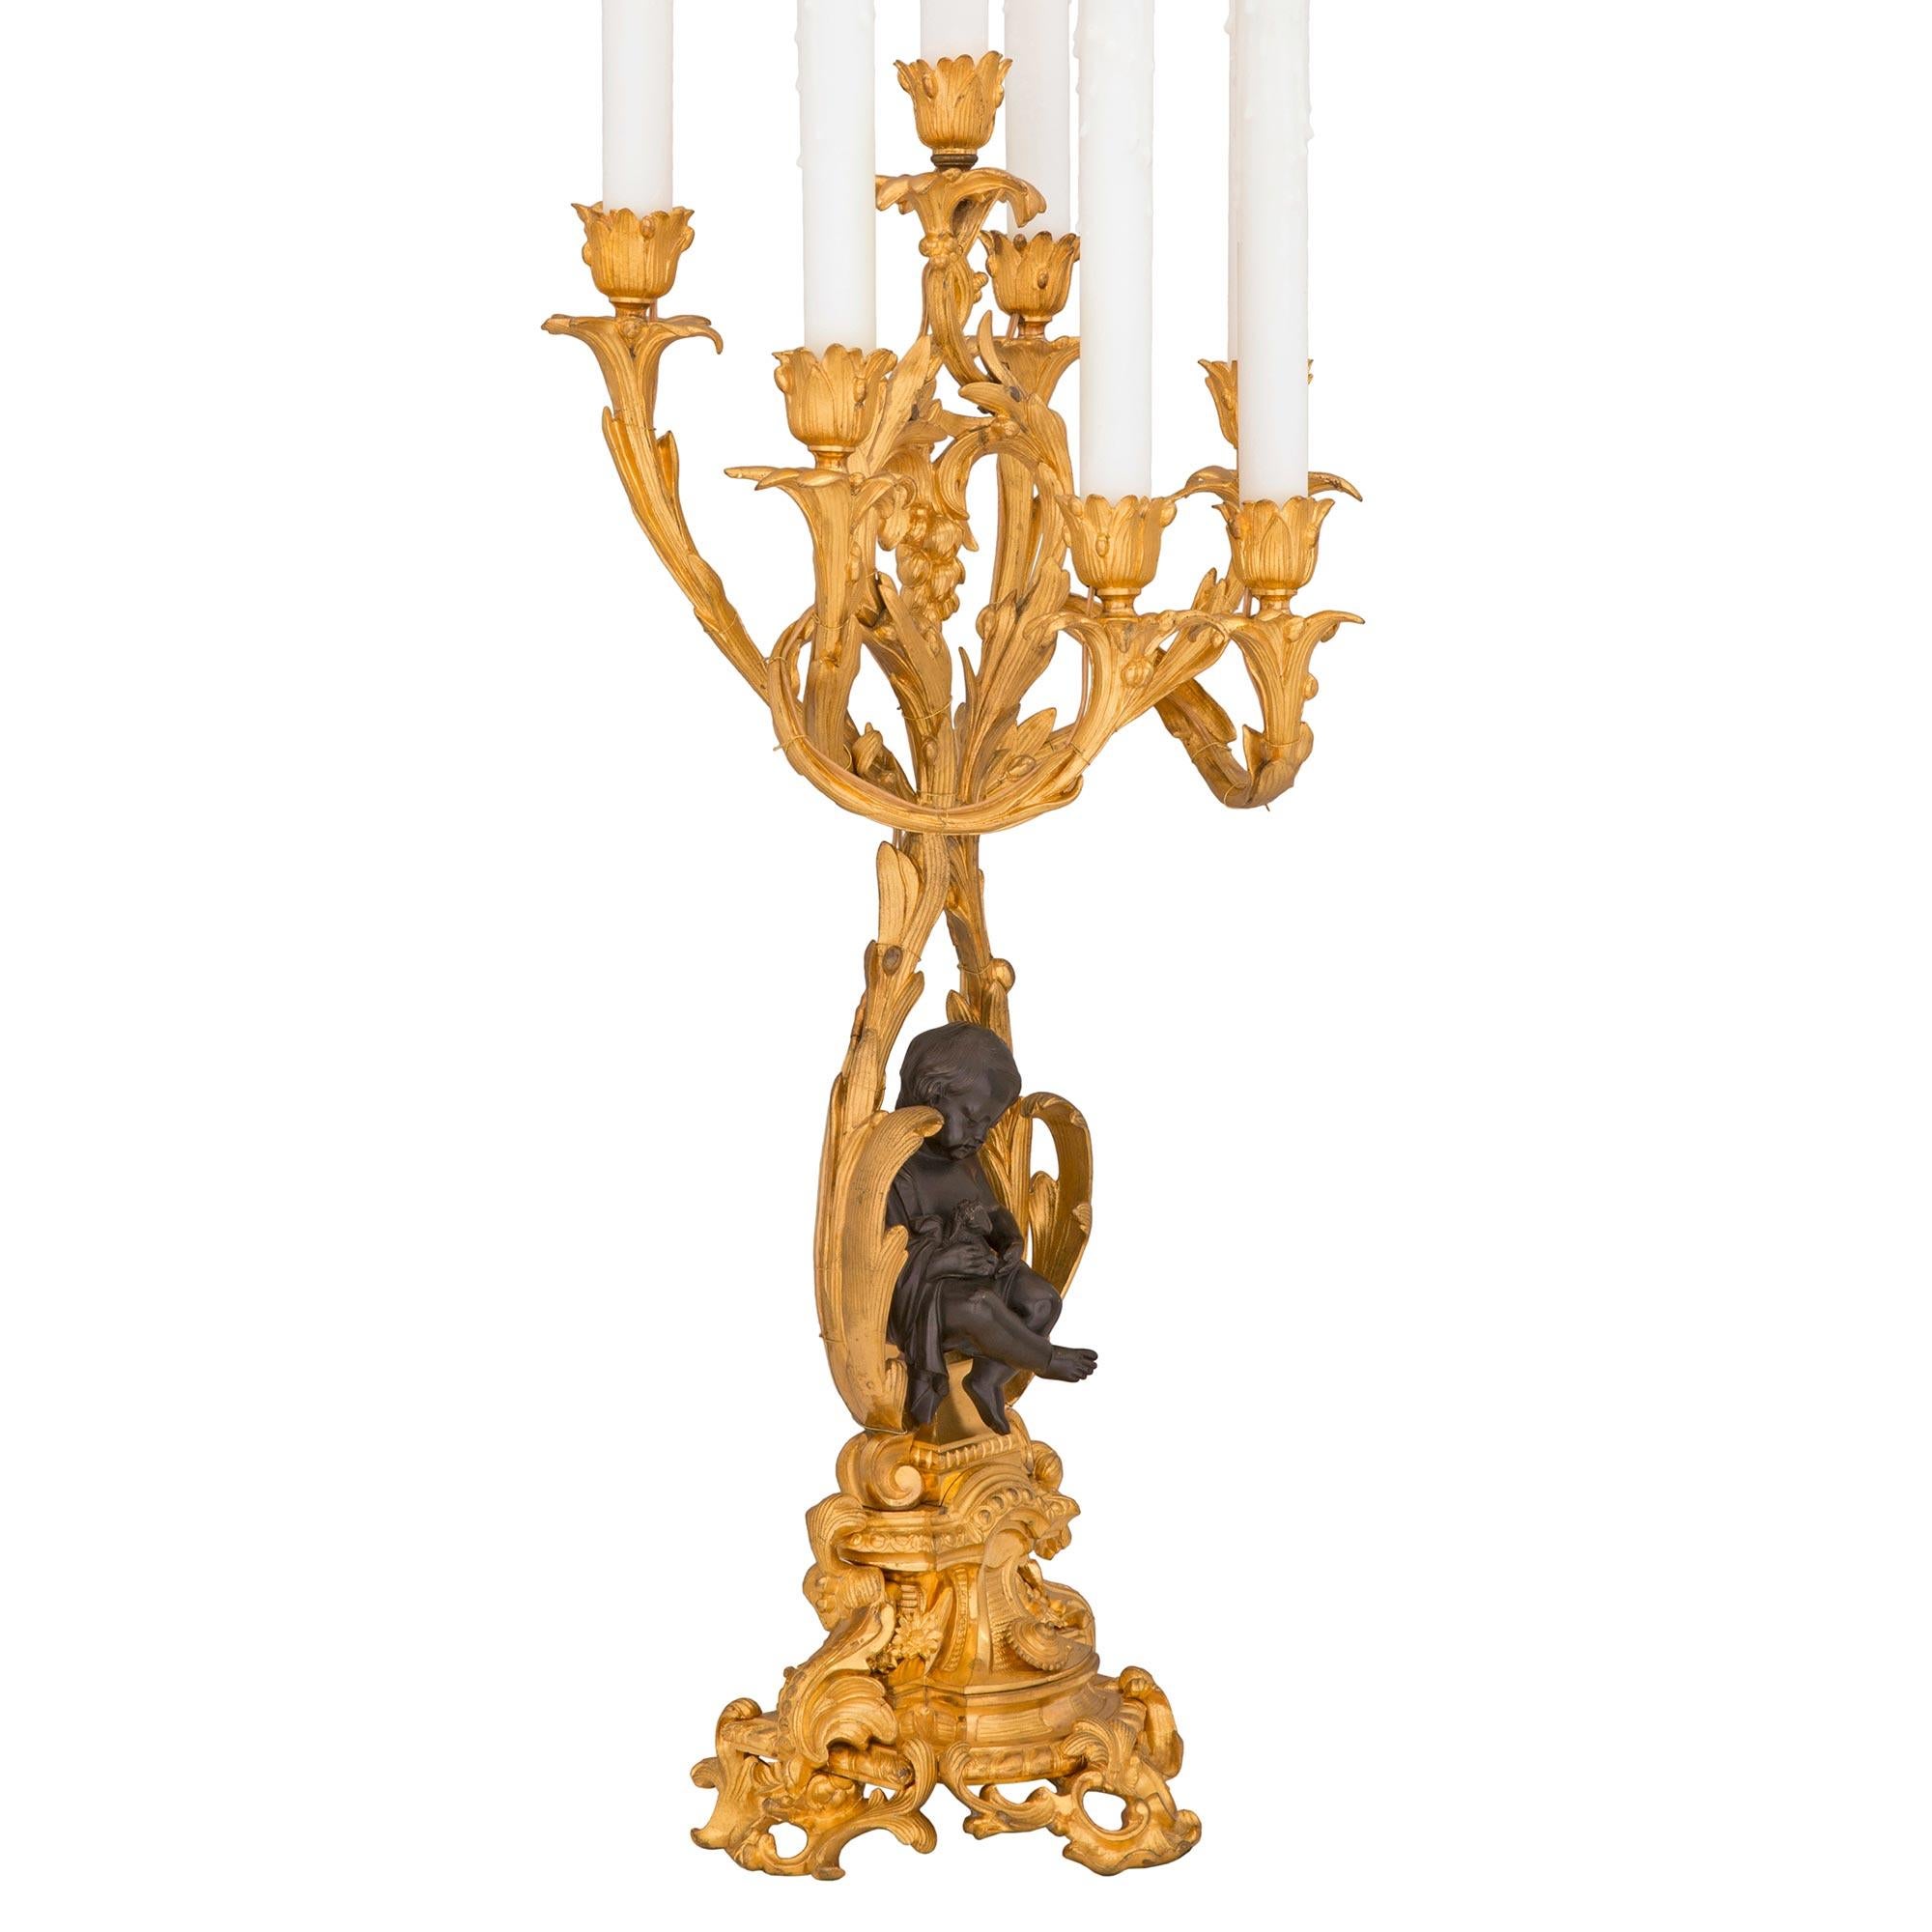 A charming and very high quality pair of French 19th century Louis XV st. ormolu and patinated bronze candelabra lamps. Each seven arm lamp is raised by a beautiful base with striking pierced scrolled foliate movements and a stunning array of most